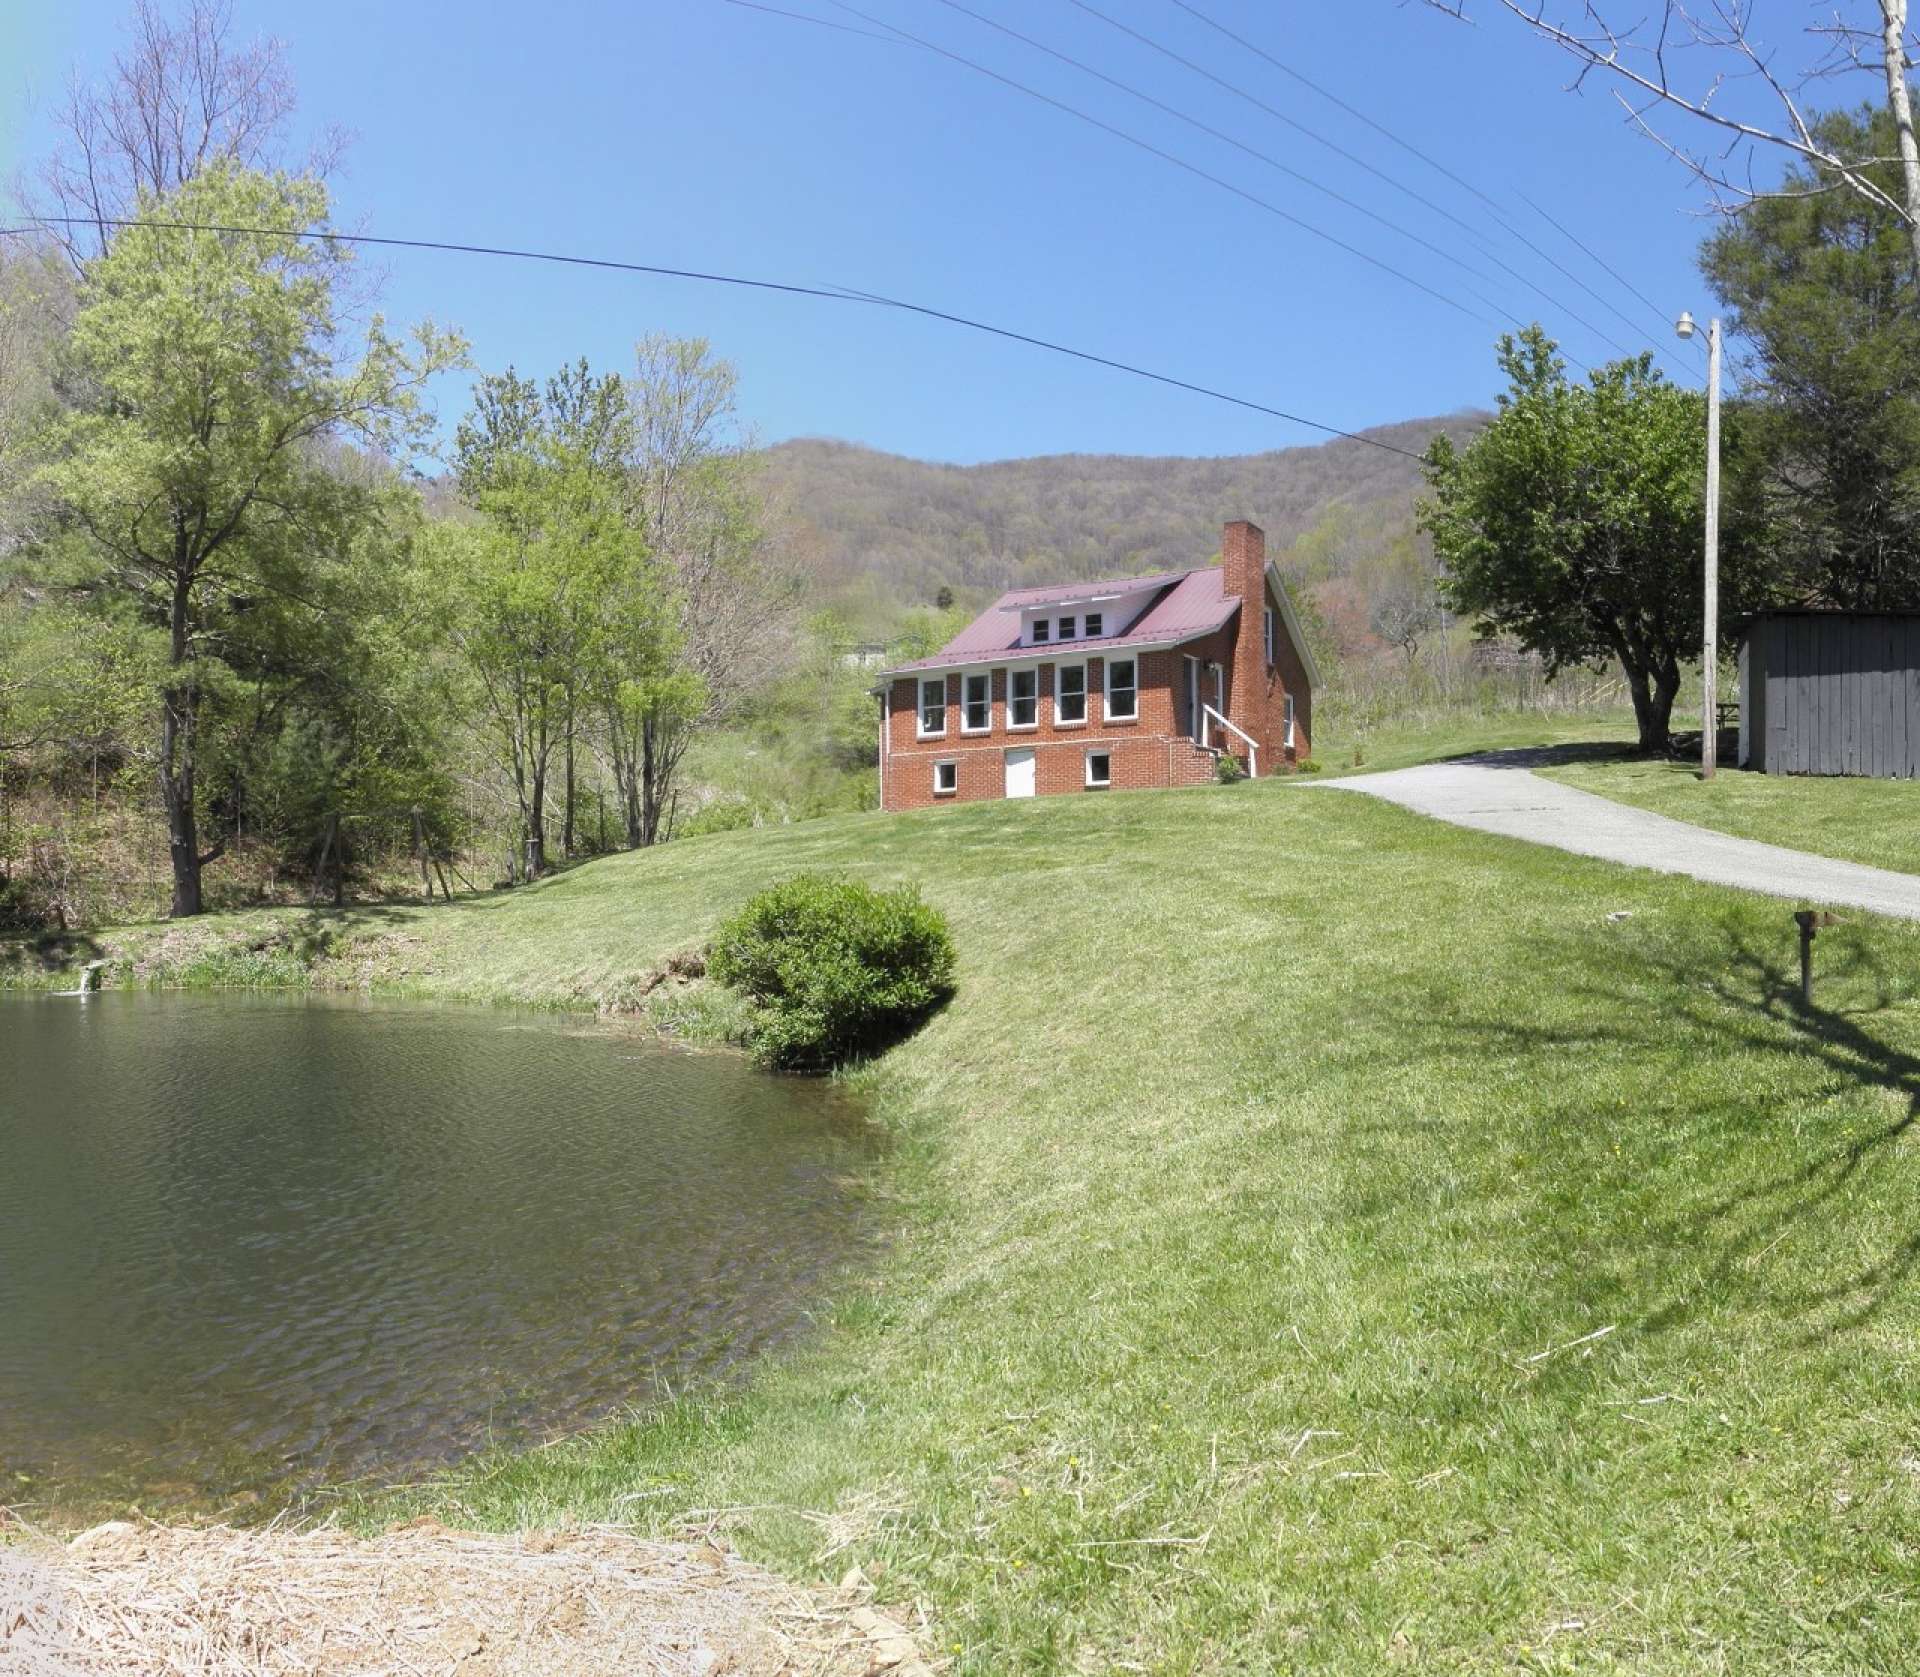 This sweet farmhouse nestled on a 2.68 acre setting with pond and mountain streams is located off of Ben Bolen road in the Creston area of Ashe County is offered at $189,900 and will serve nicely as your NC Mountain retreat or primary home.  O115